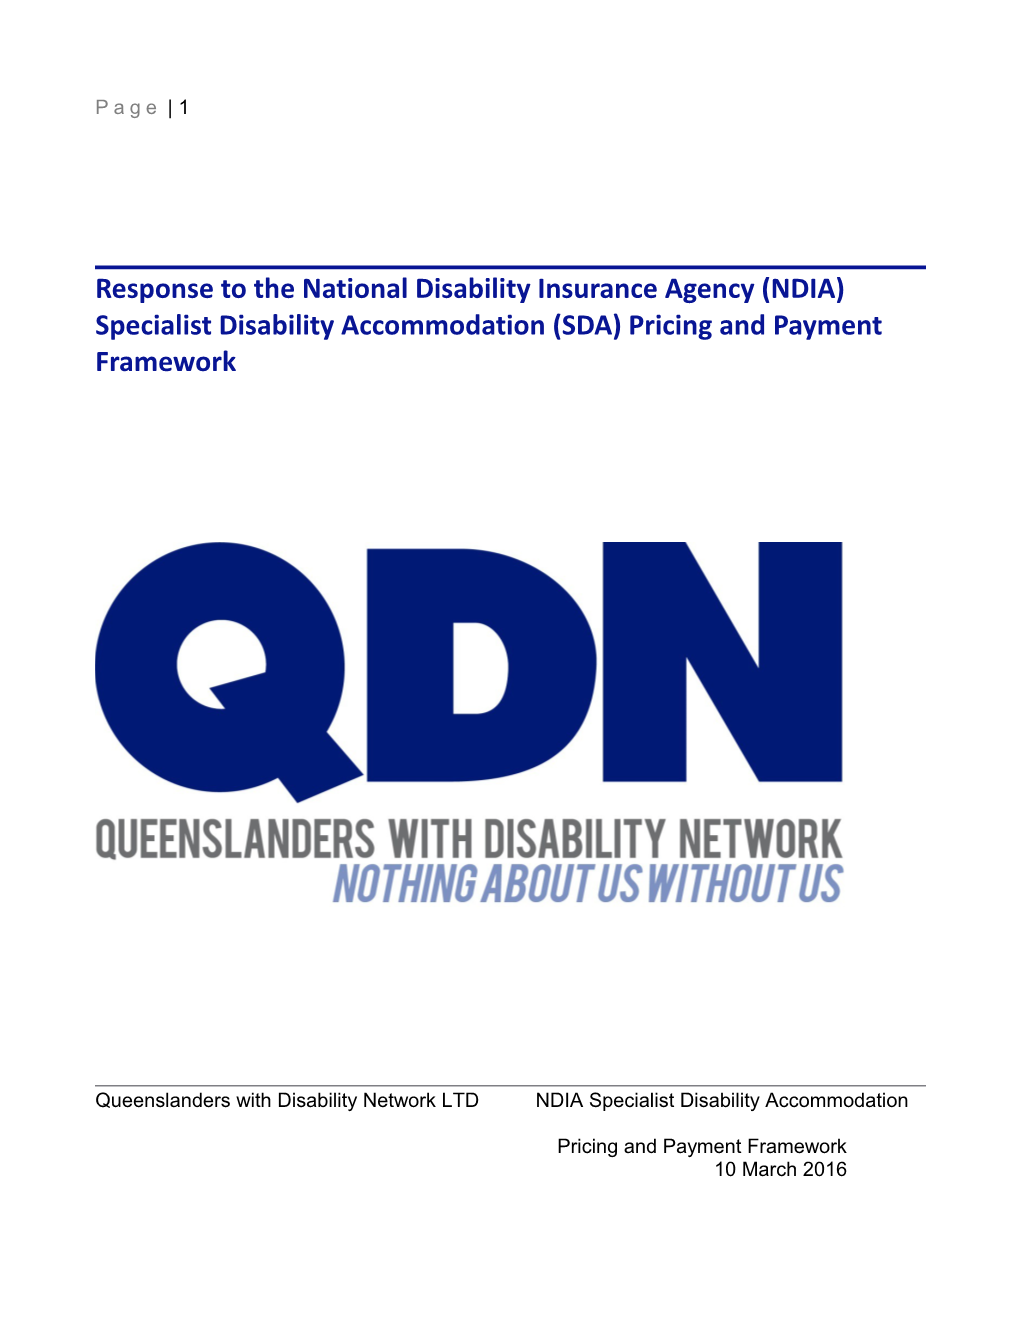 About Queenslanders with Disability Network (QDN)